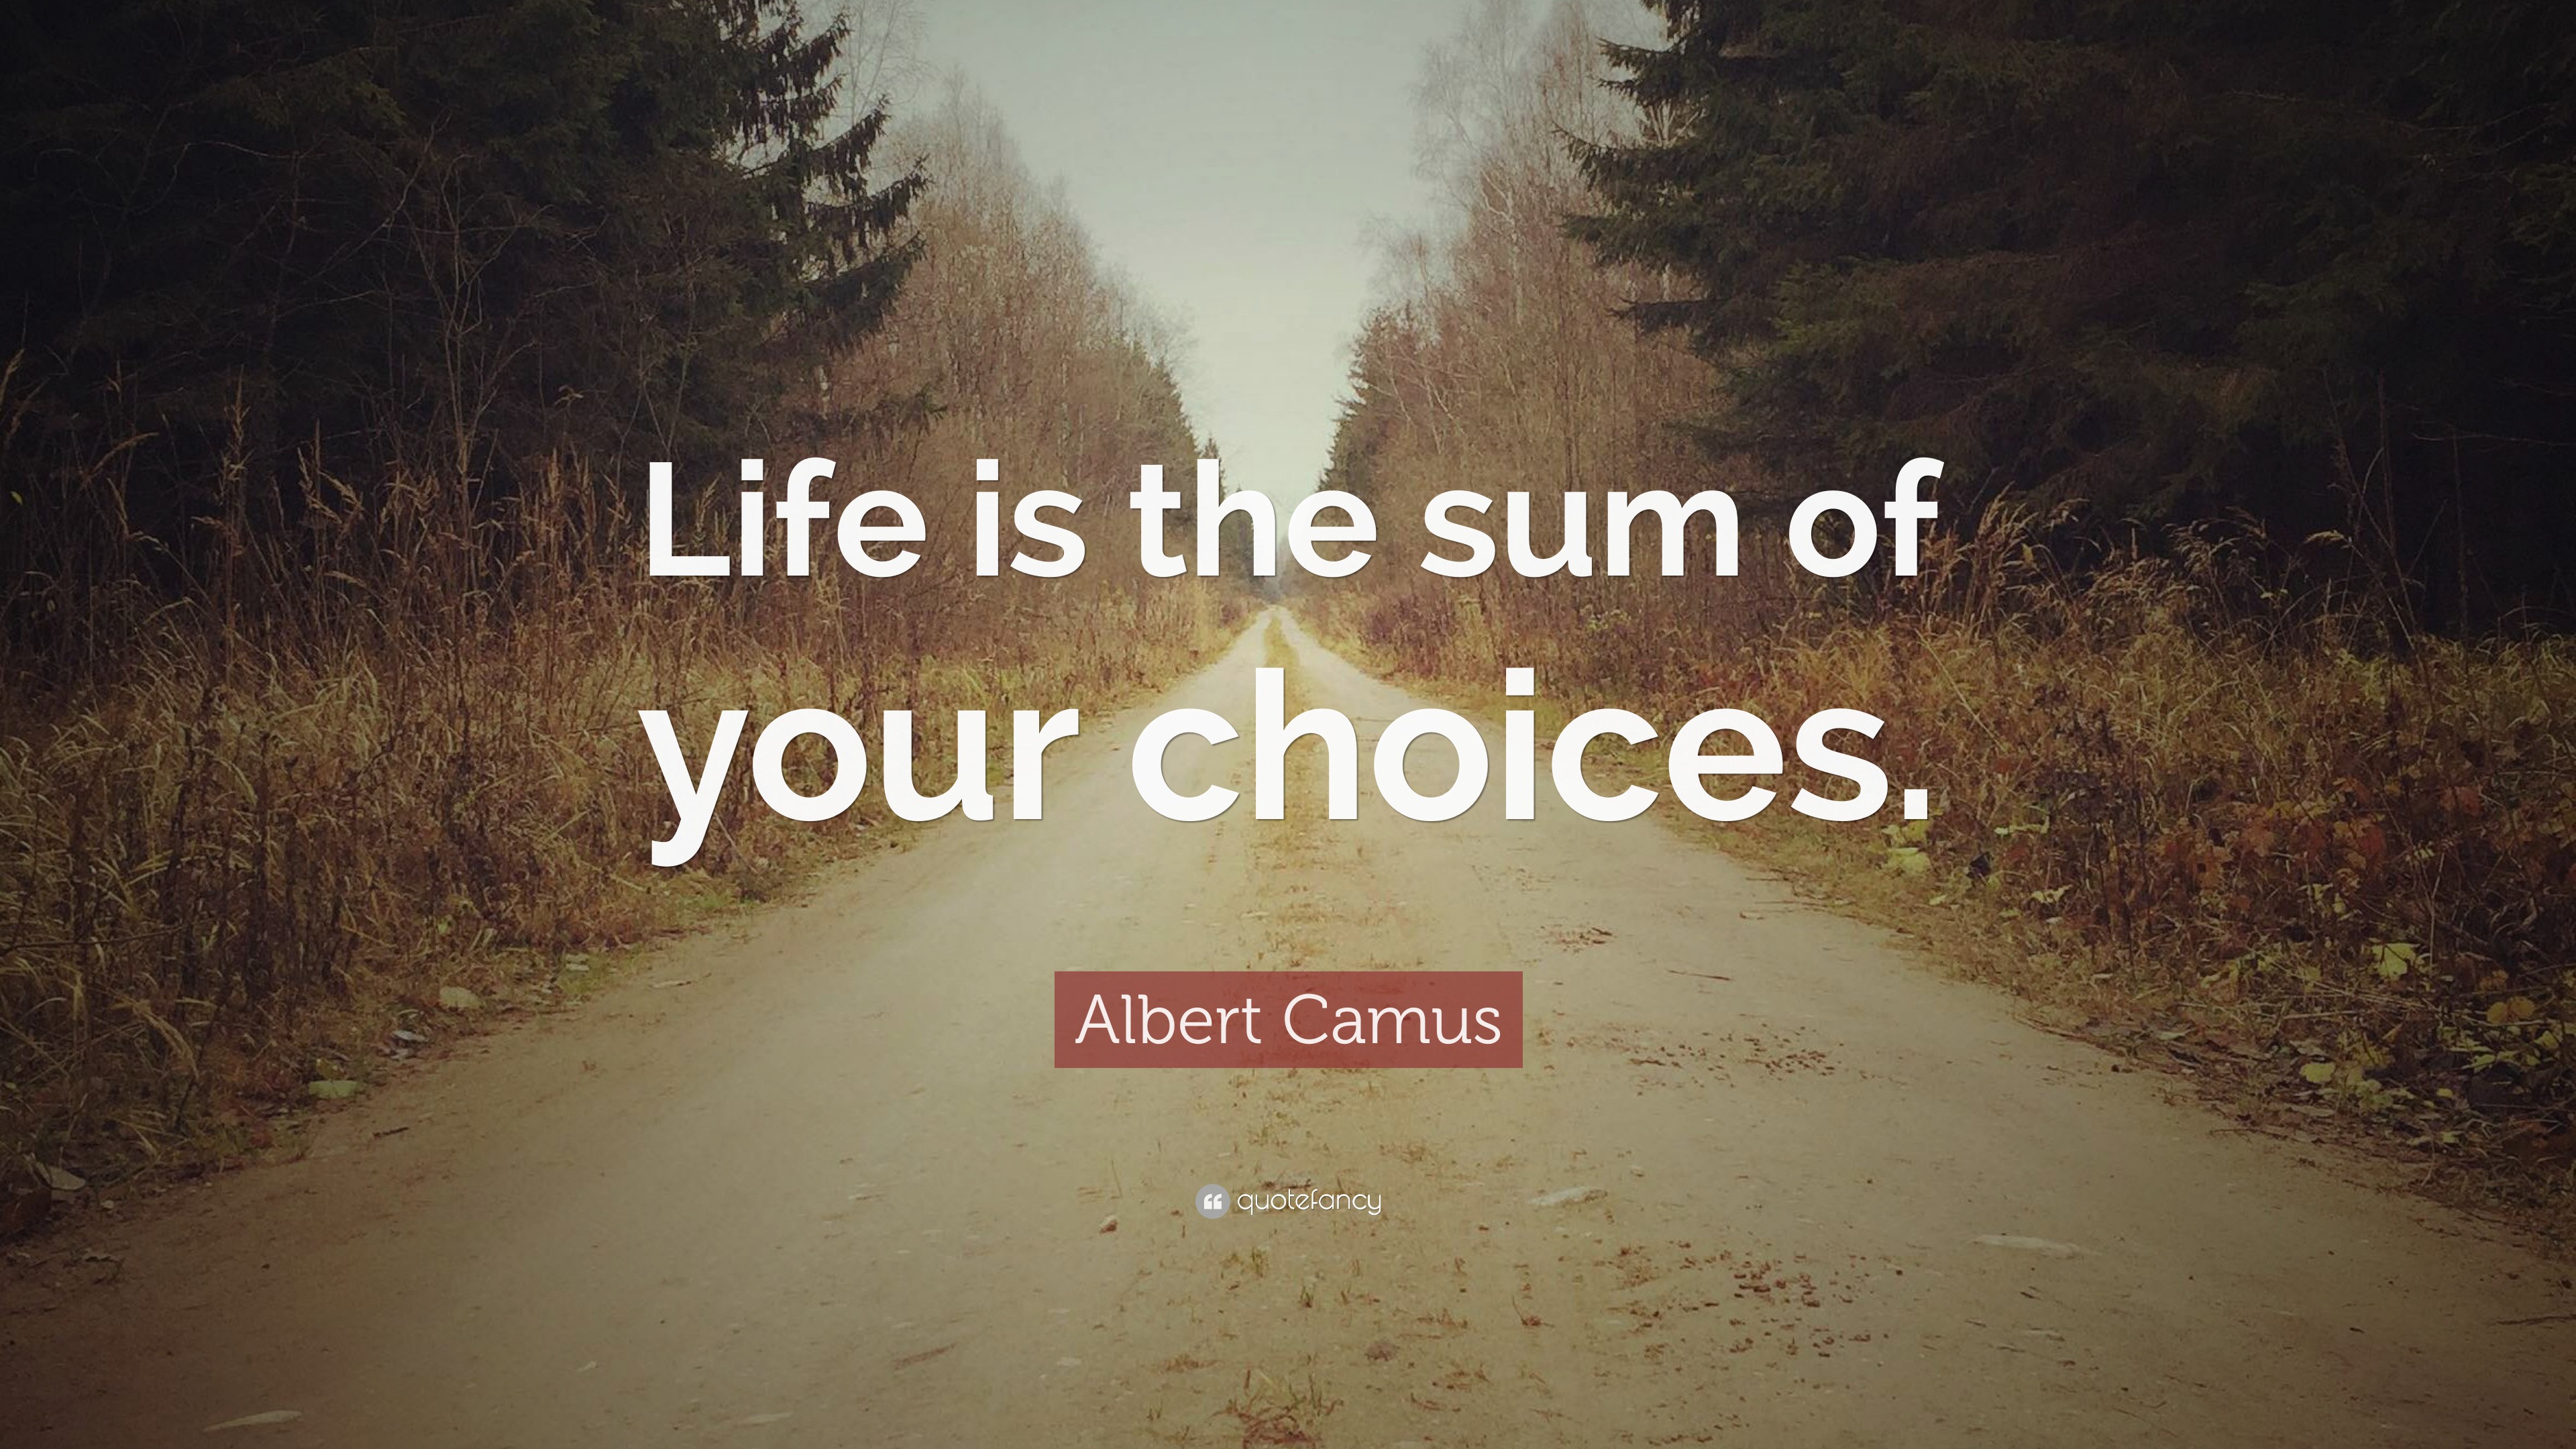 Albert Camus Quote “Life is the sum of your choices.” (12